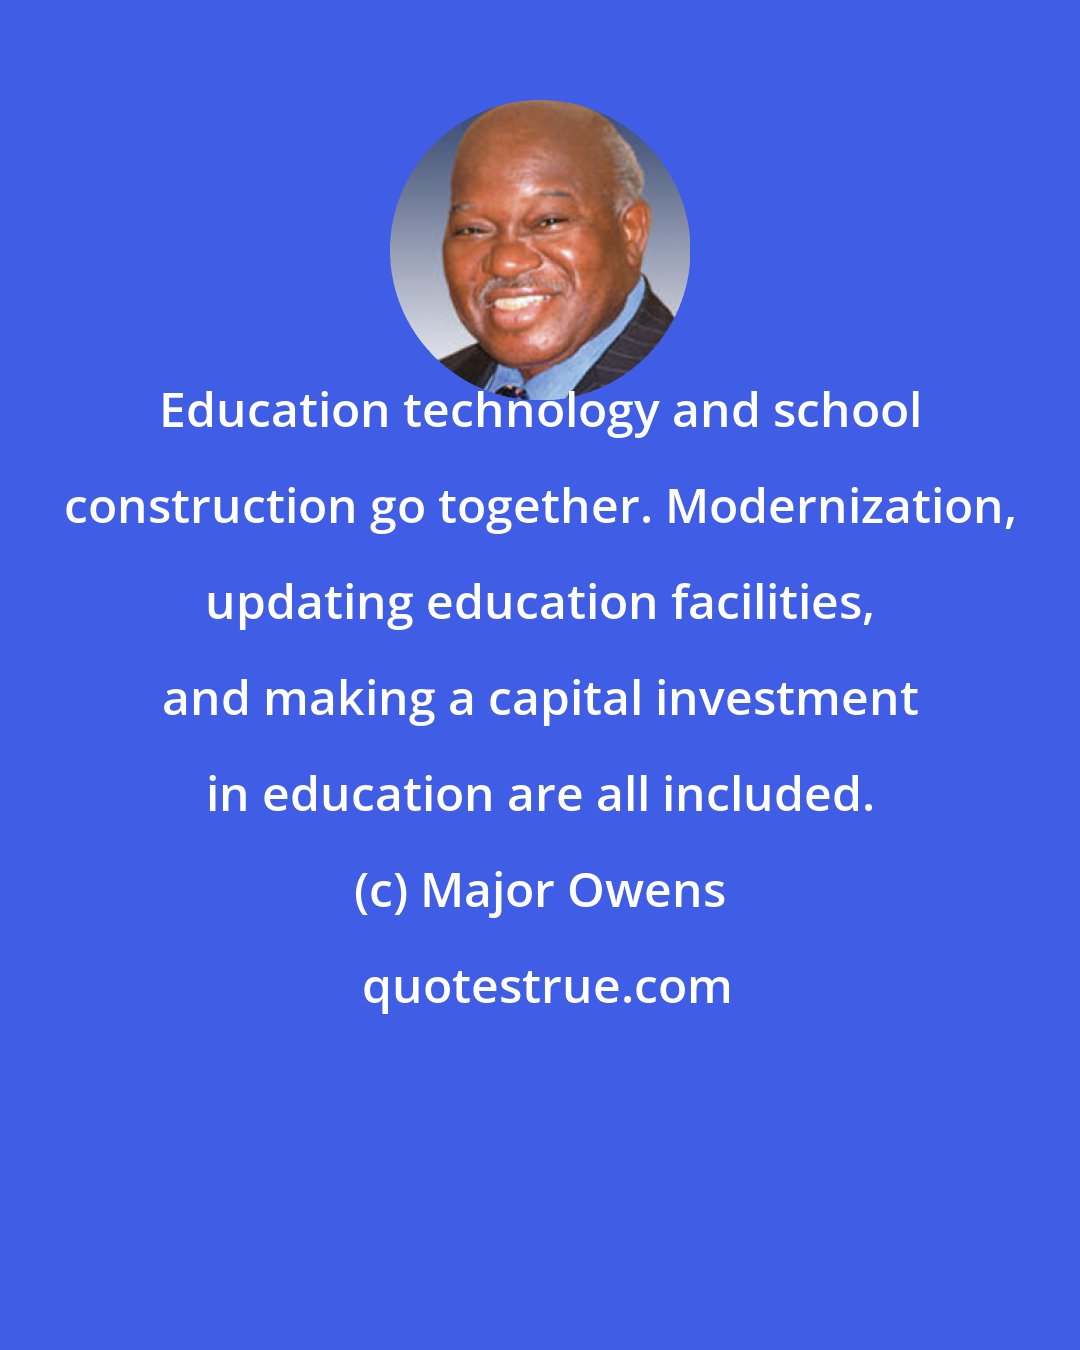 Major Owens: Education technology and school construction go together. Modernization, updating education facilities, and making a capital investment in education are all included.